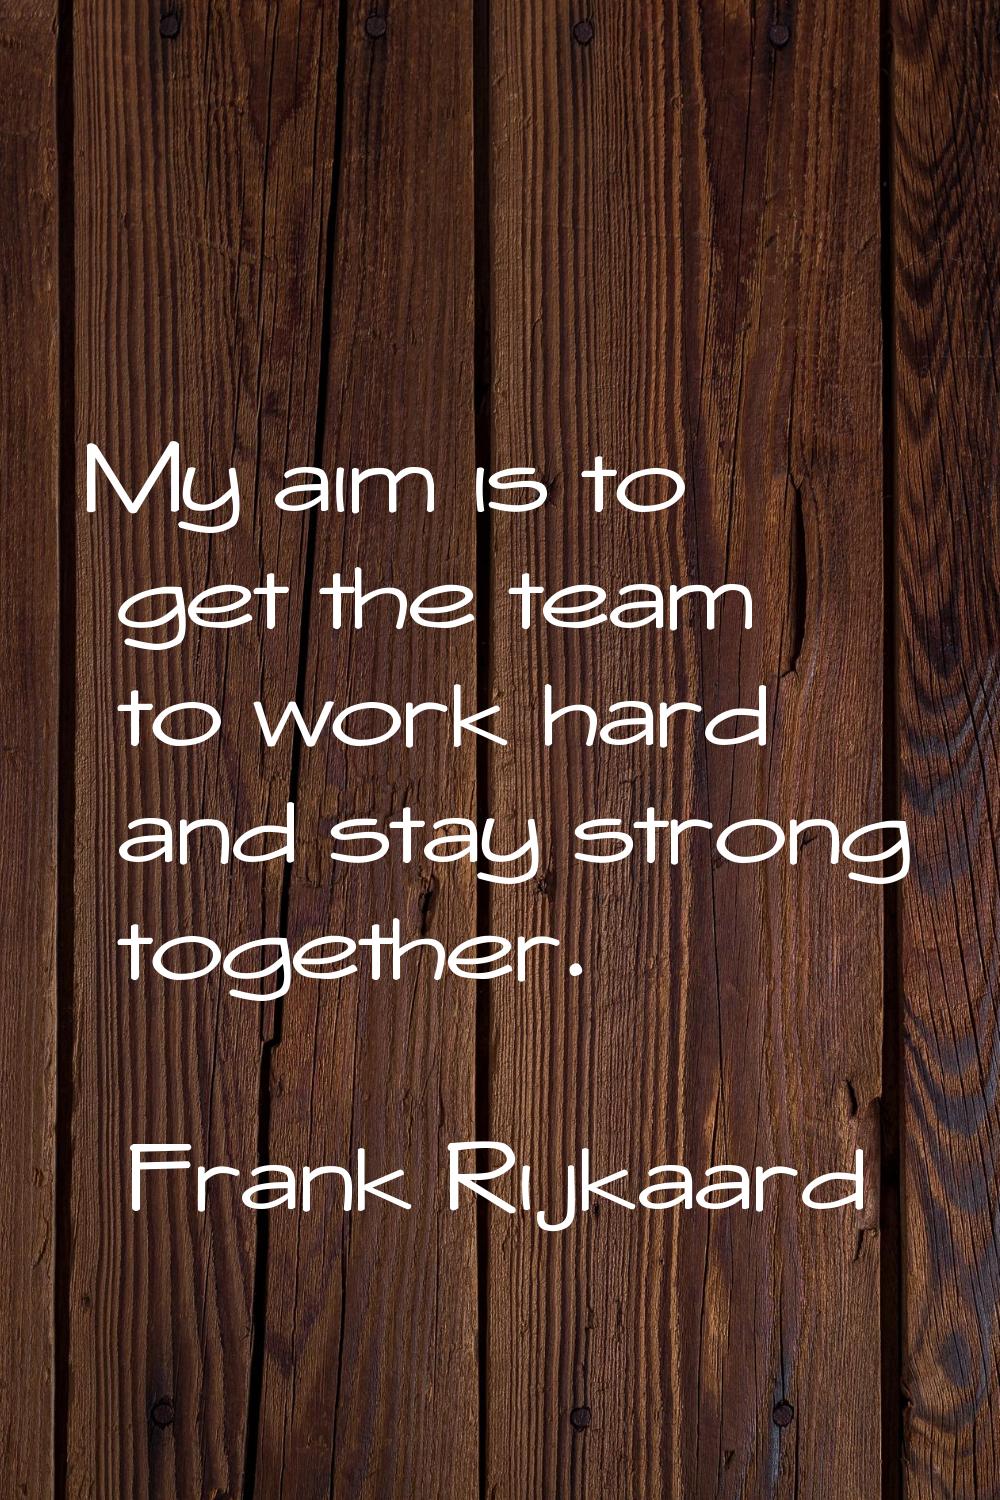 My aim is to get the team to work hard and stay strong together.